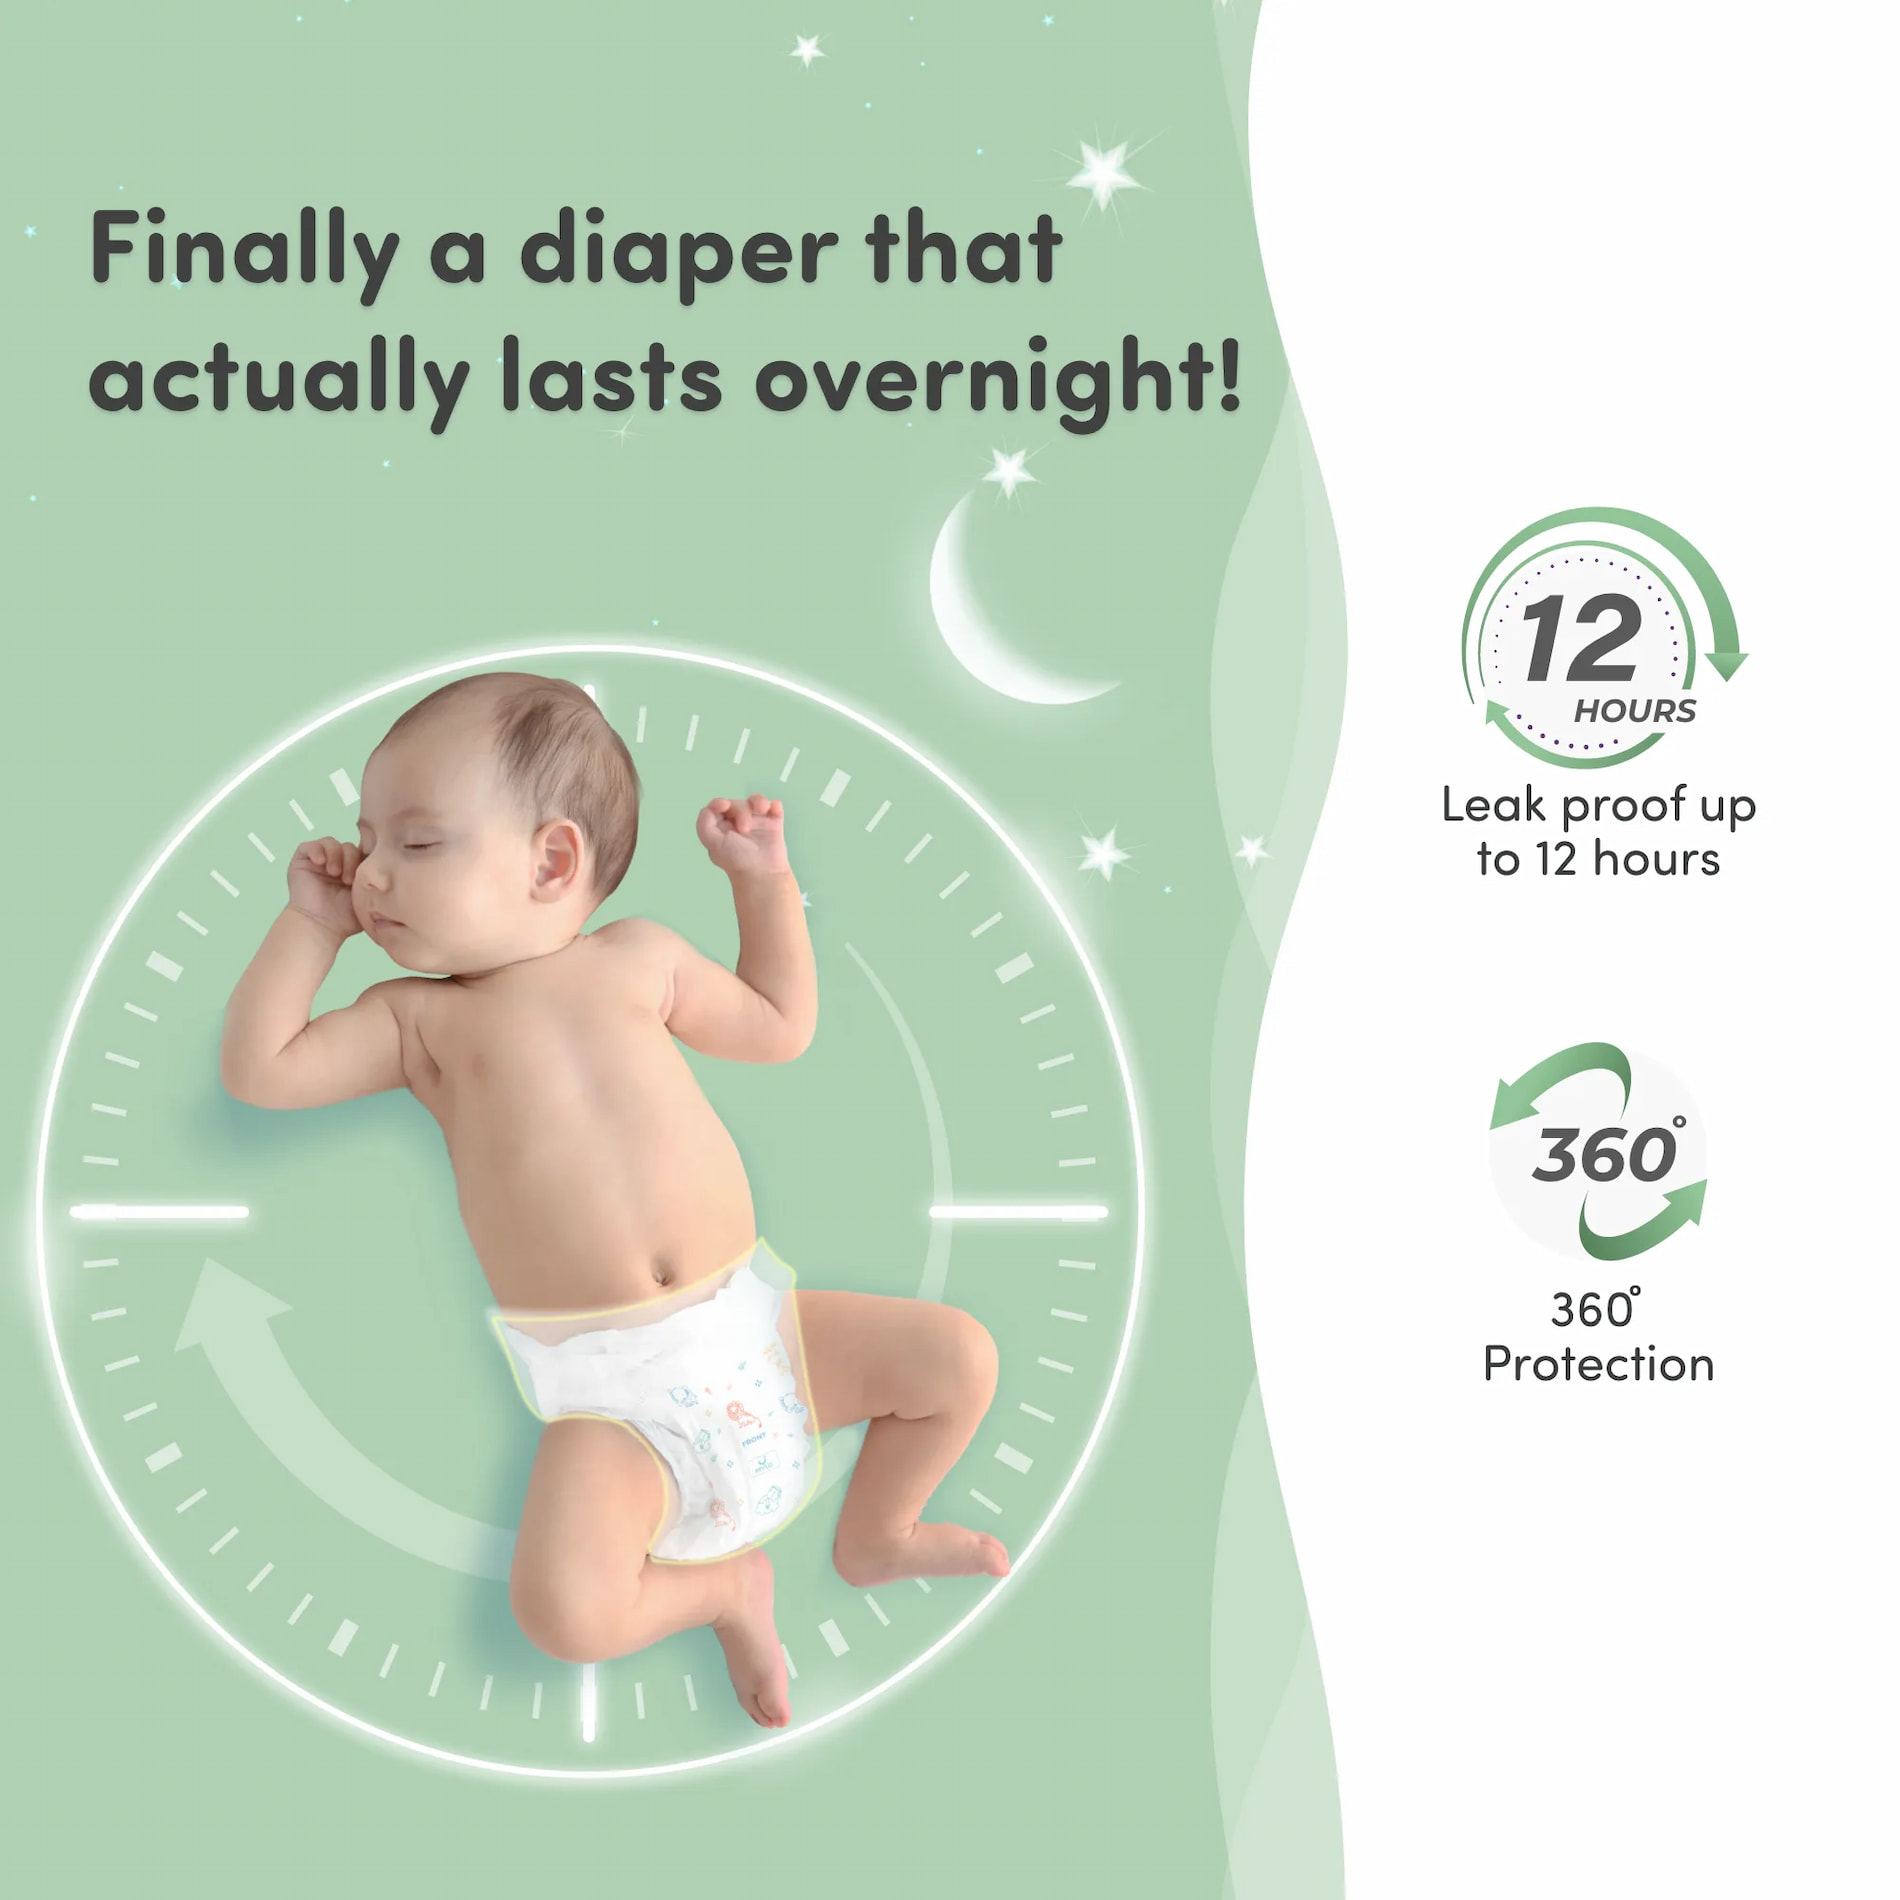 Baby Diaper Pants Small (S) Size, 4-8 kgs with ADL Technology - 84 Count - 12 Hours Protection